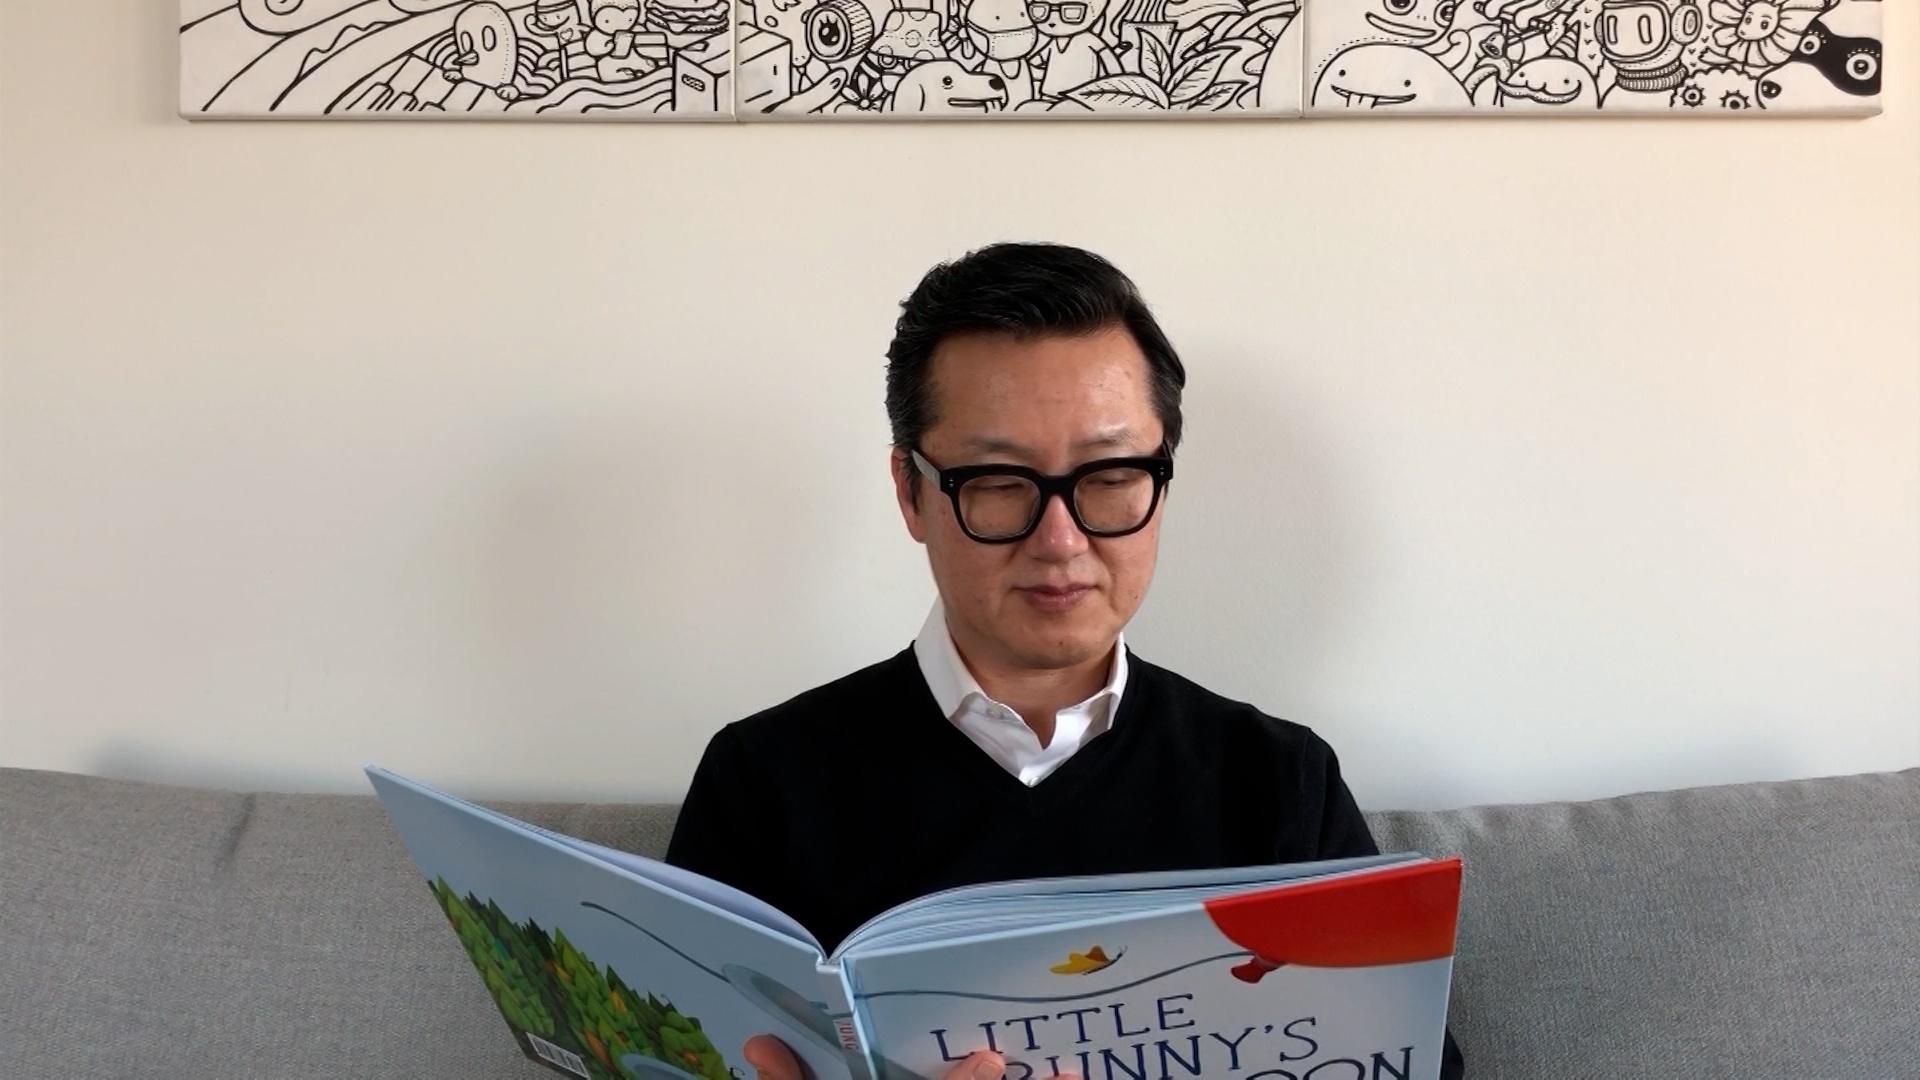 An Asian man with glasses reads a children's book.